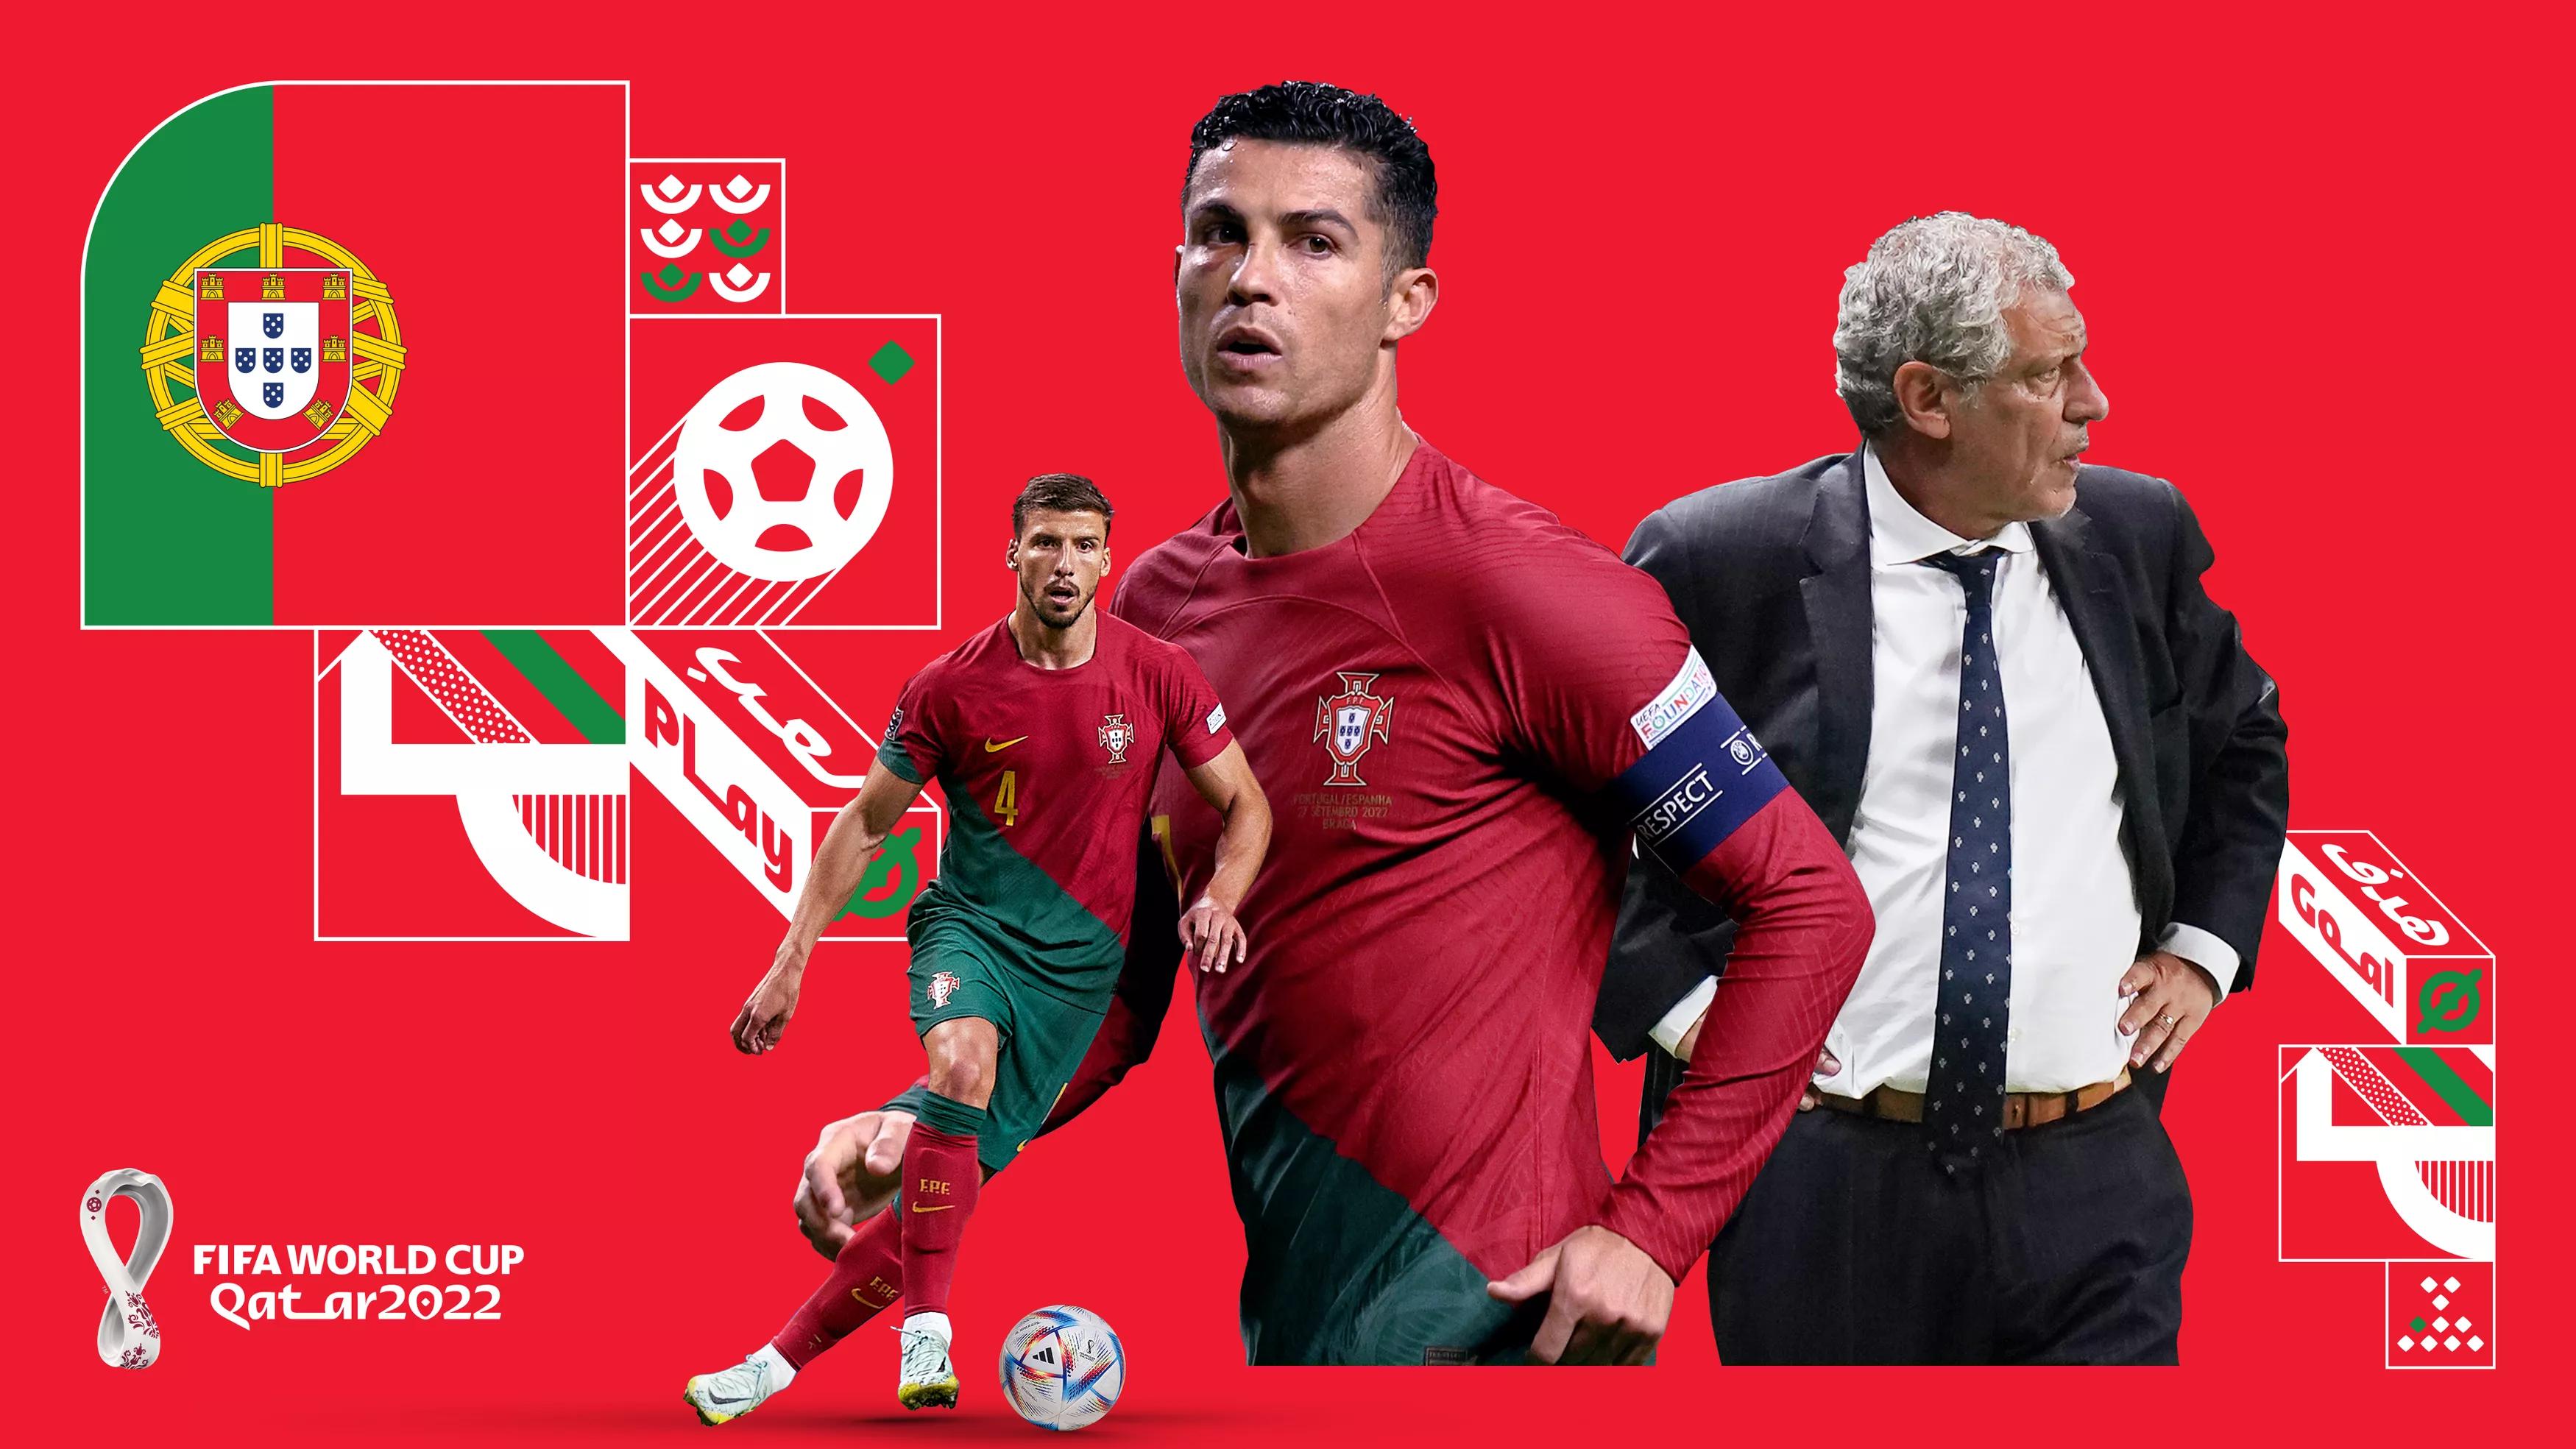 Fifa World Cup 2022 Portugal Wallpapers